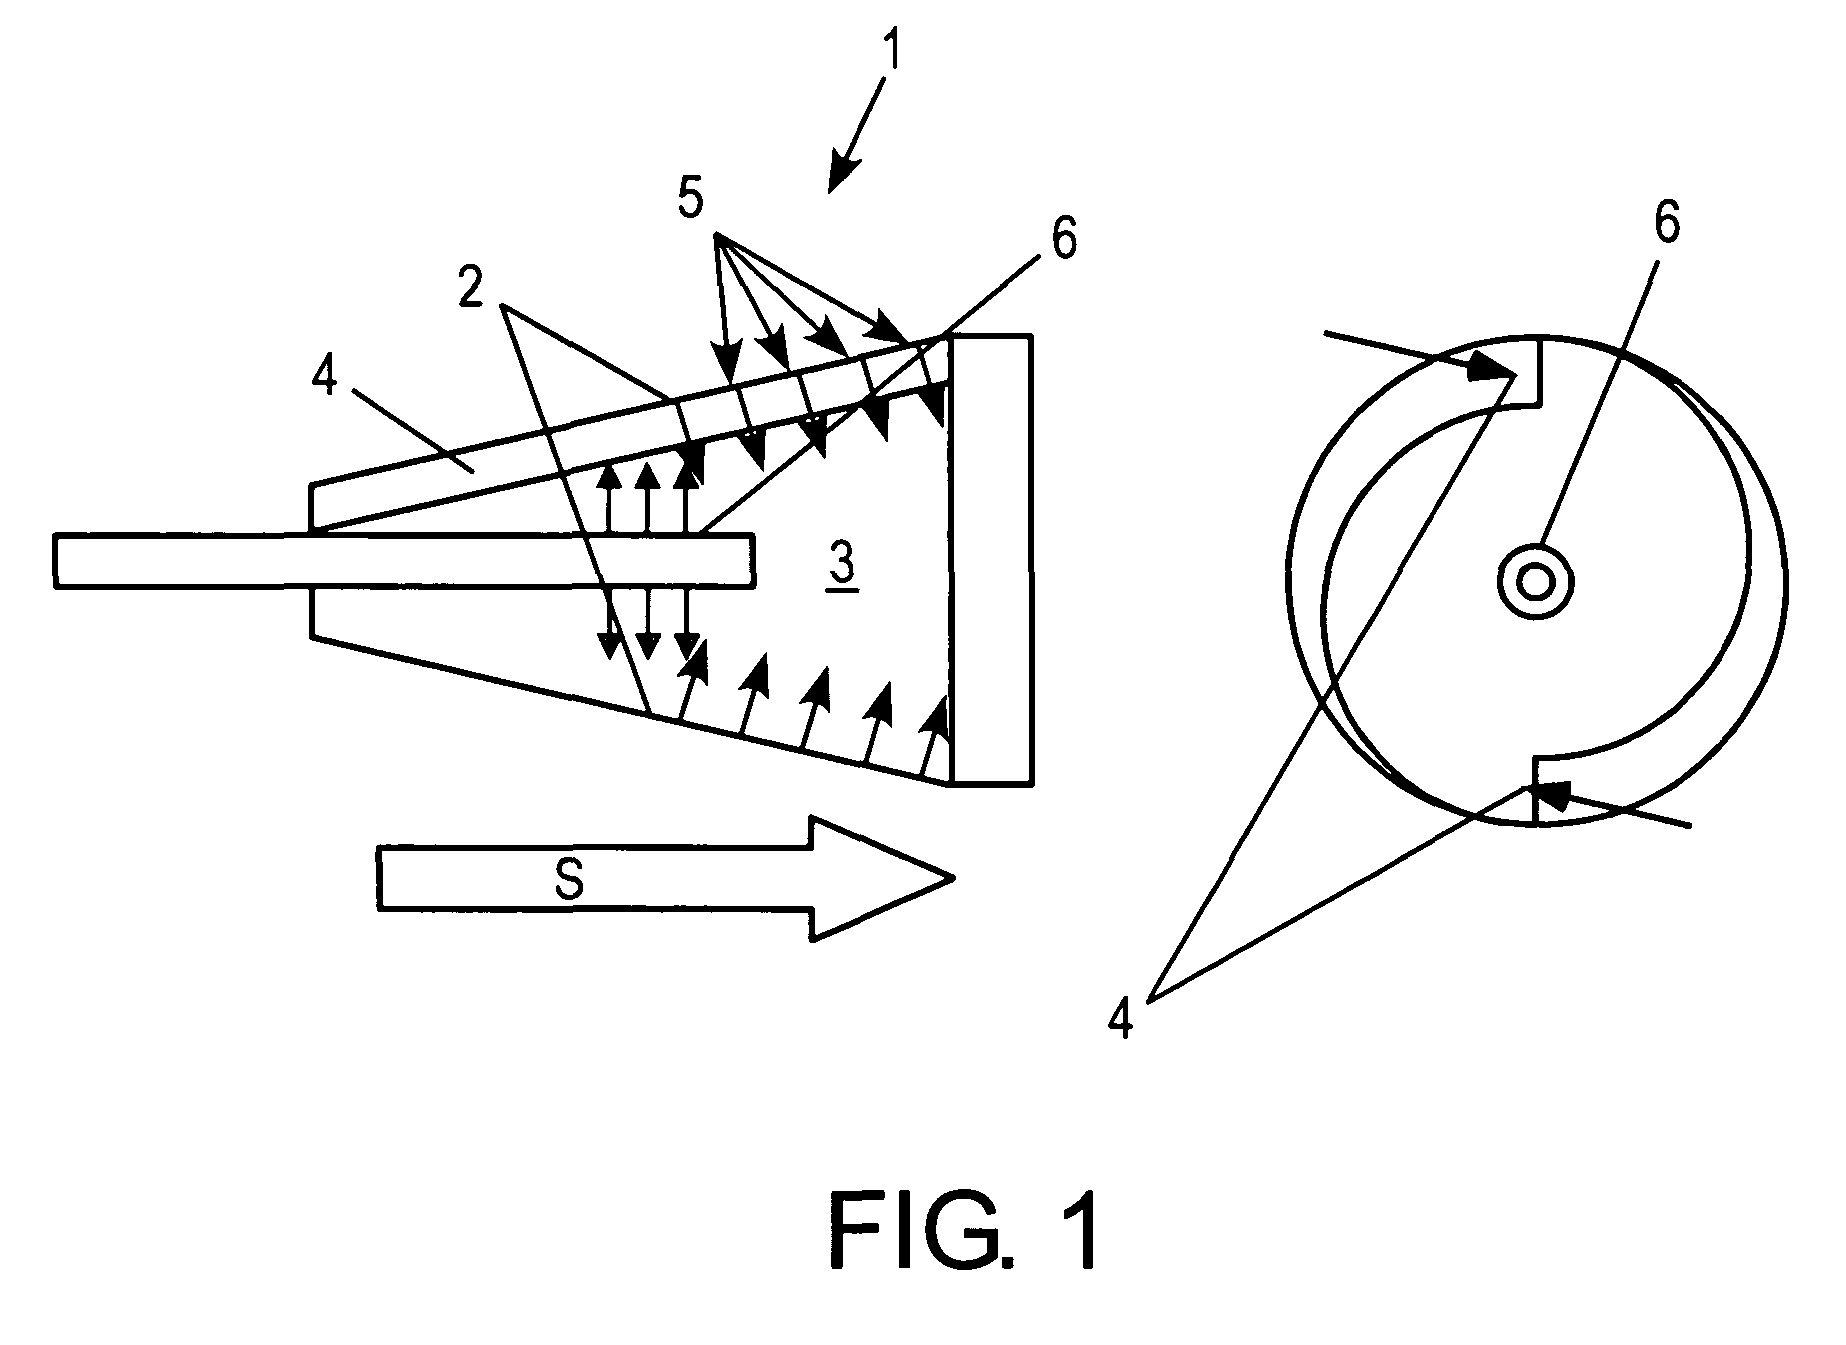 Multiple burner arrangement for operating a combustion chamber, and method for operating the multiple burner arrangement